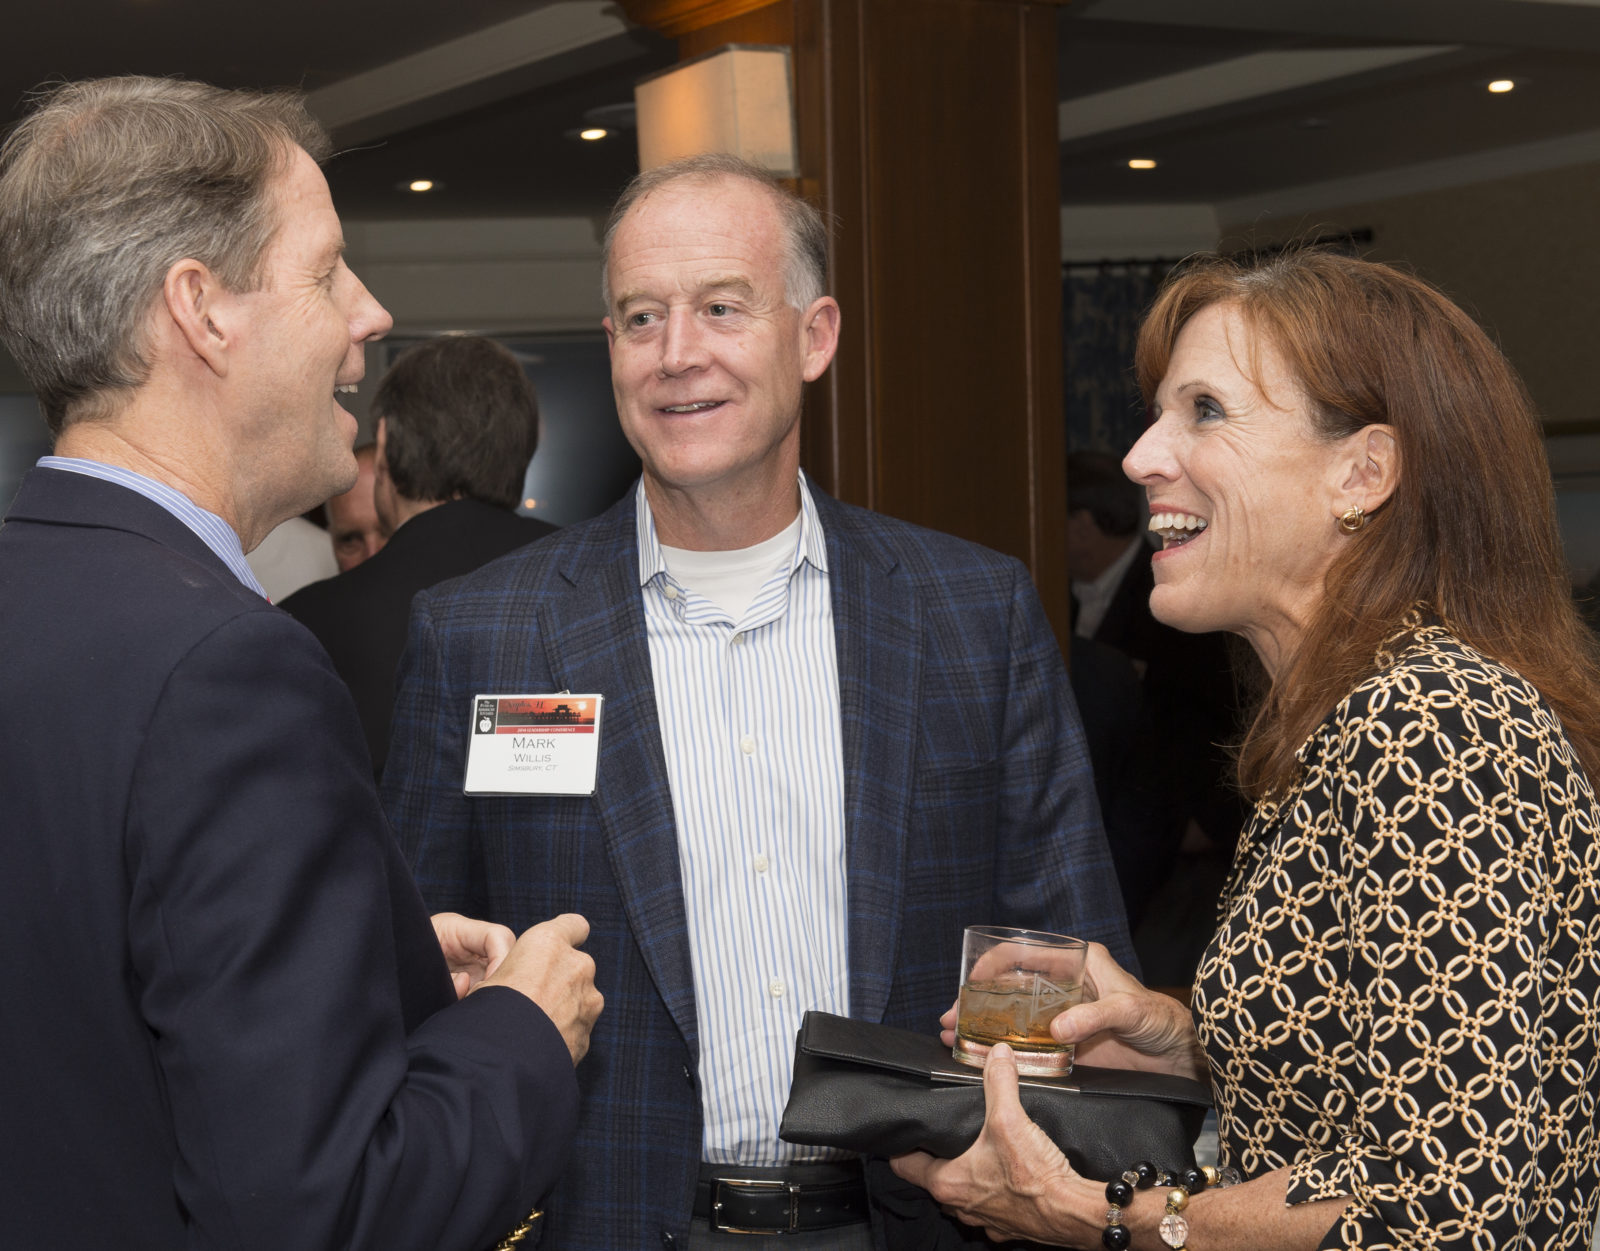 Mark and Patty speak with TFAS President Roger Ream (far left) at the 2014 Leadership Conference in Naples, Florida.